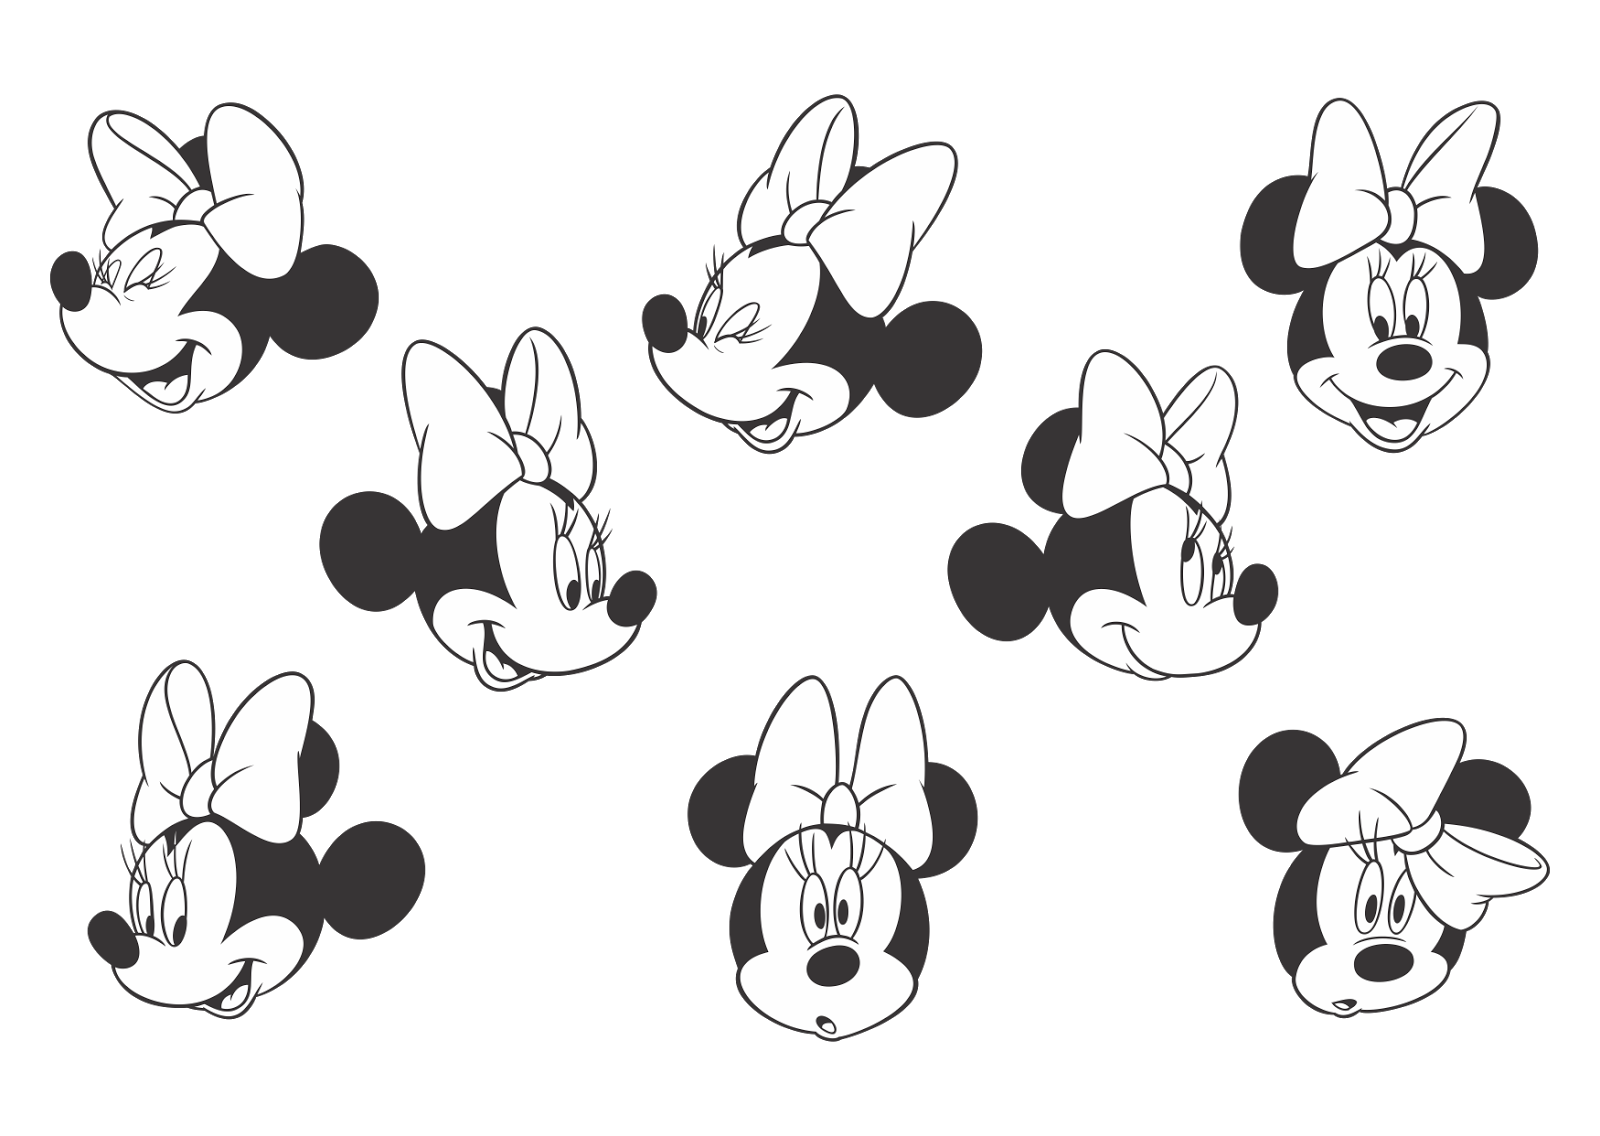 Minnie Mouse (Black-white) Logo Vector ~ Format Cdr, Ai, Eps, Svg, PDF, PNG